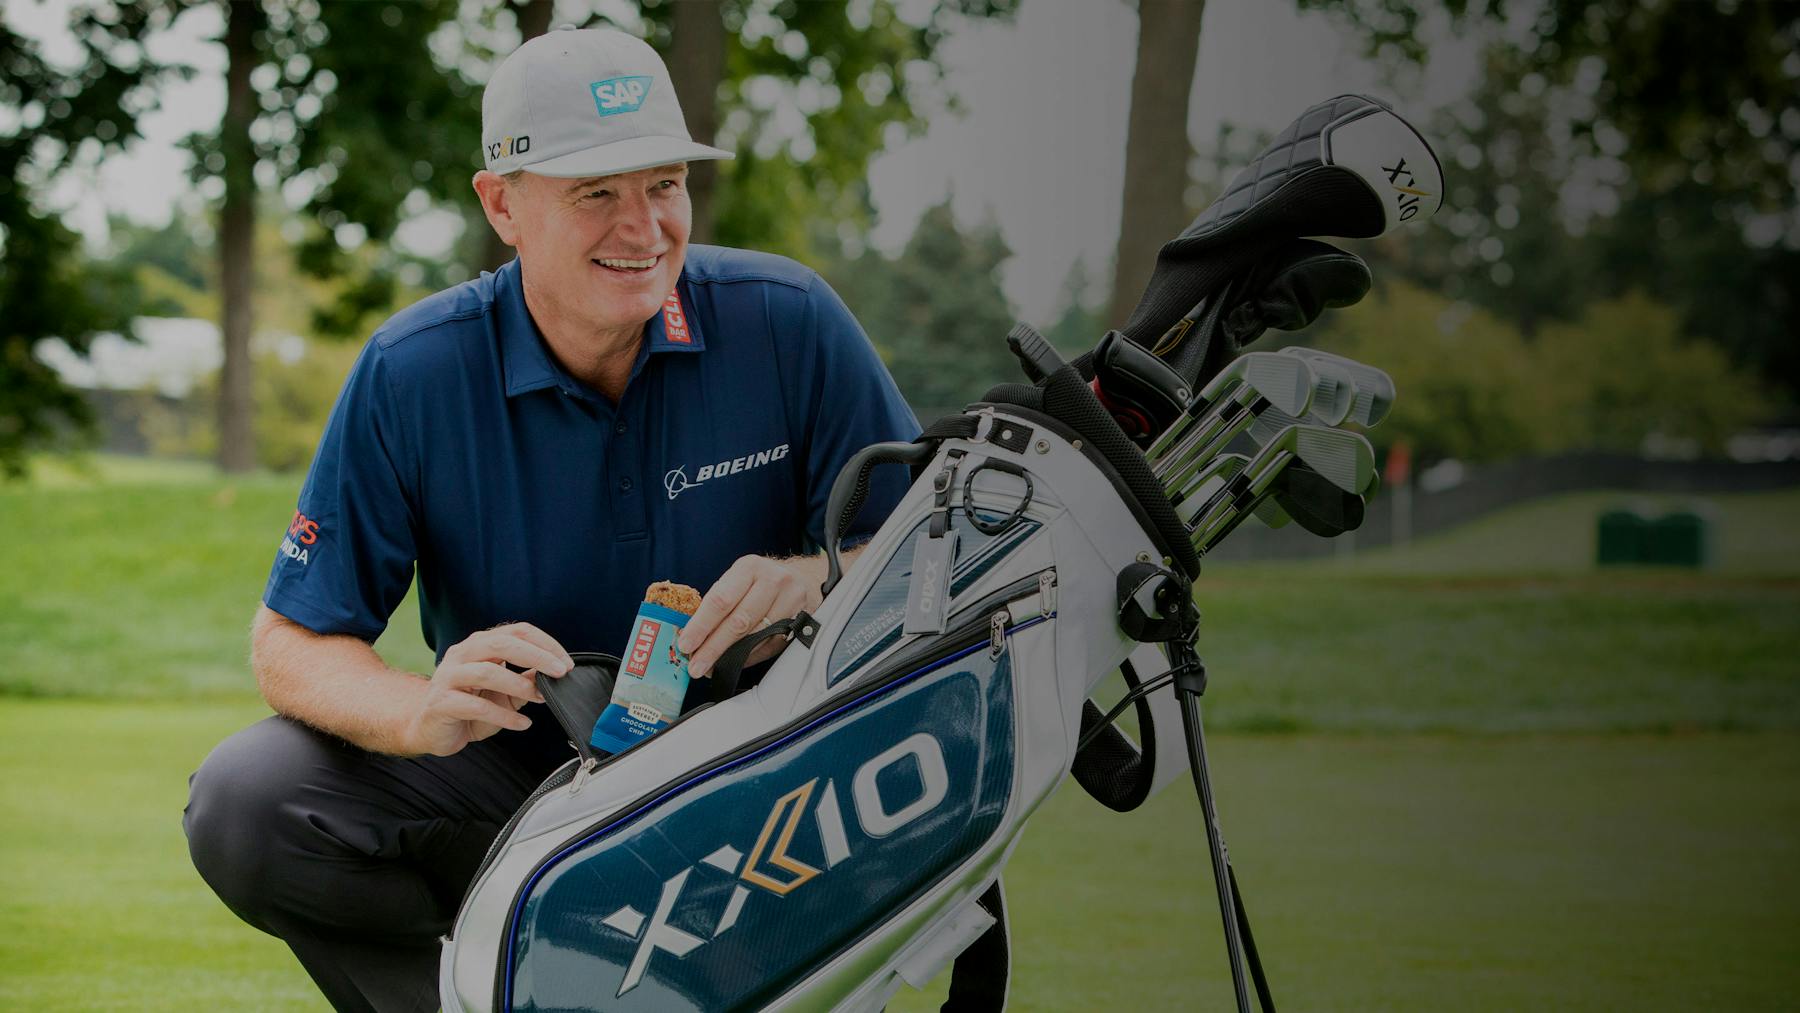 Ernie Els What to Eat Before Golf revised